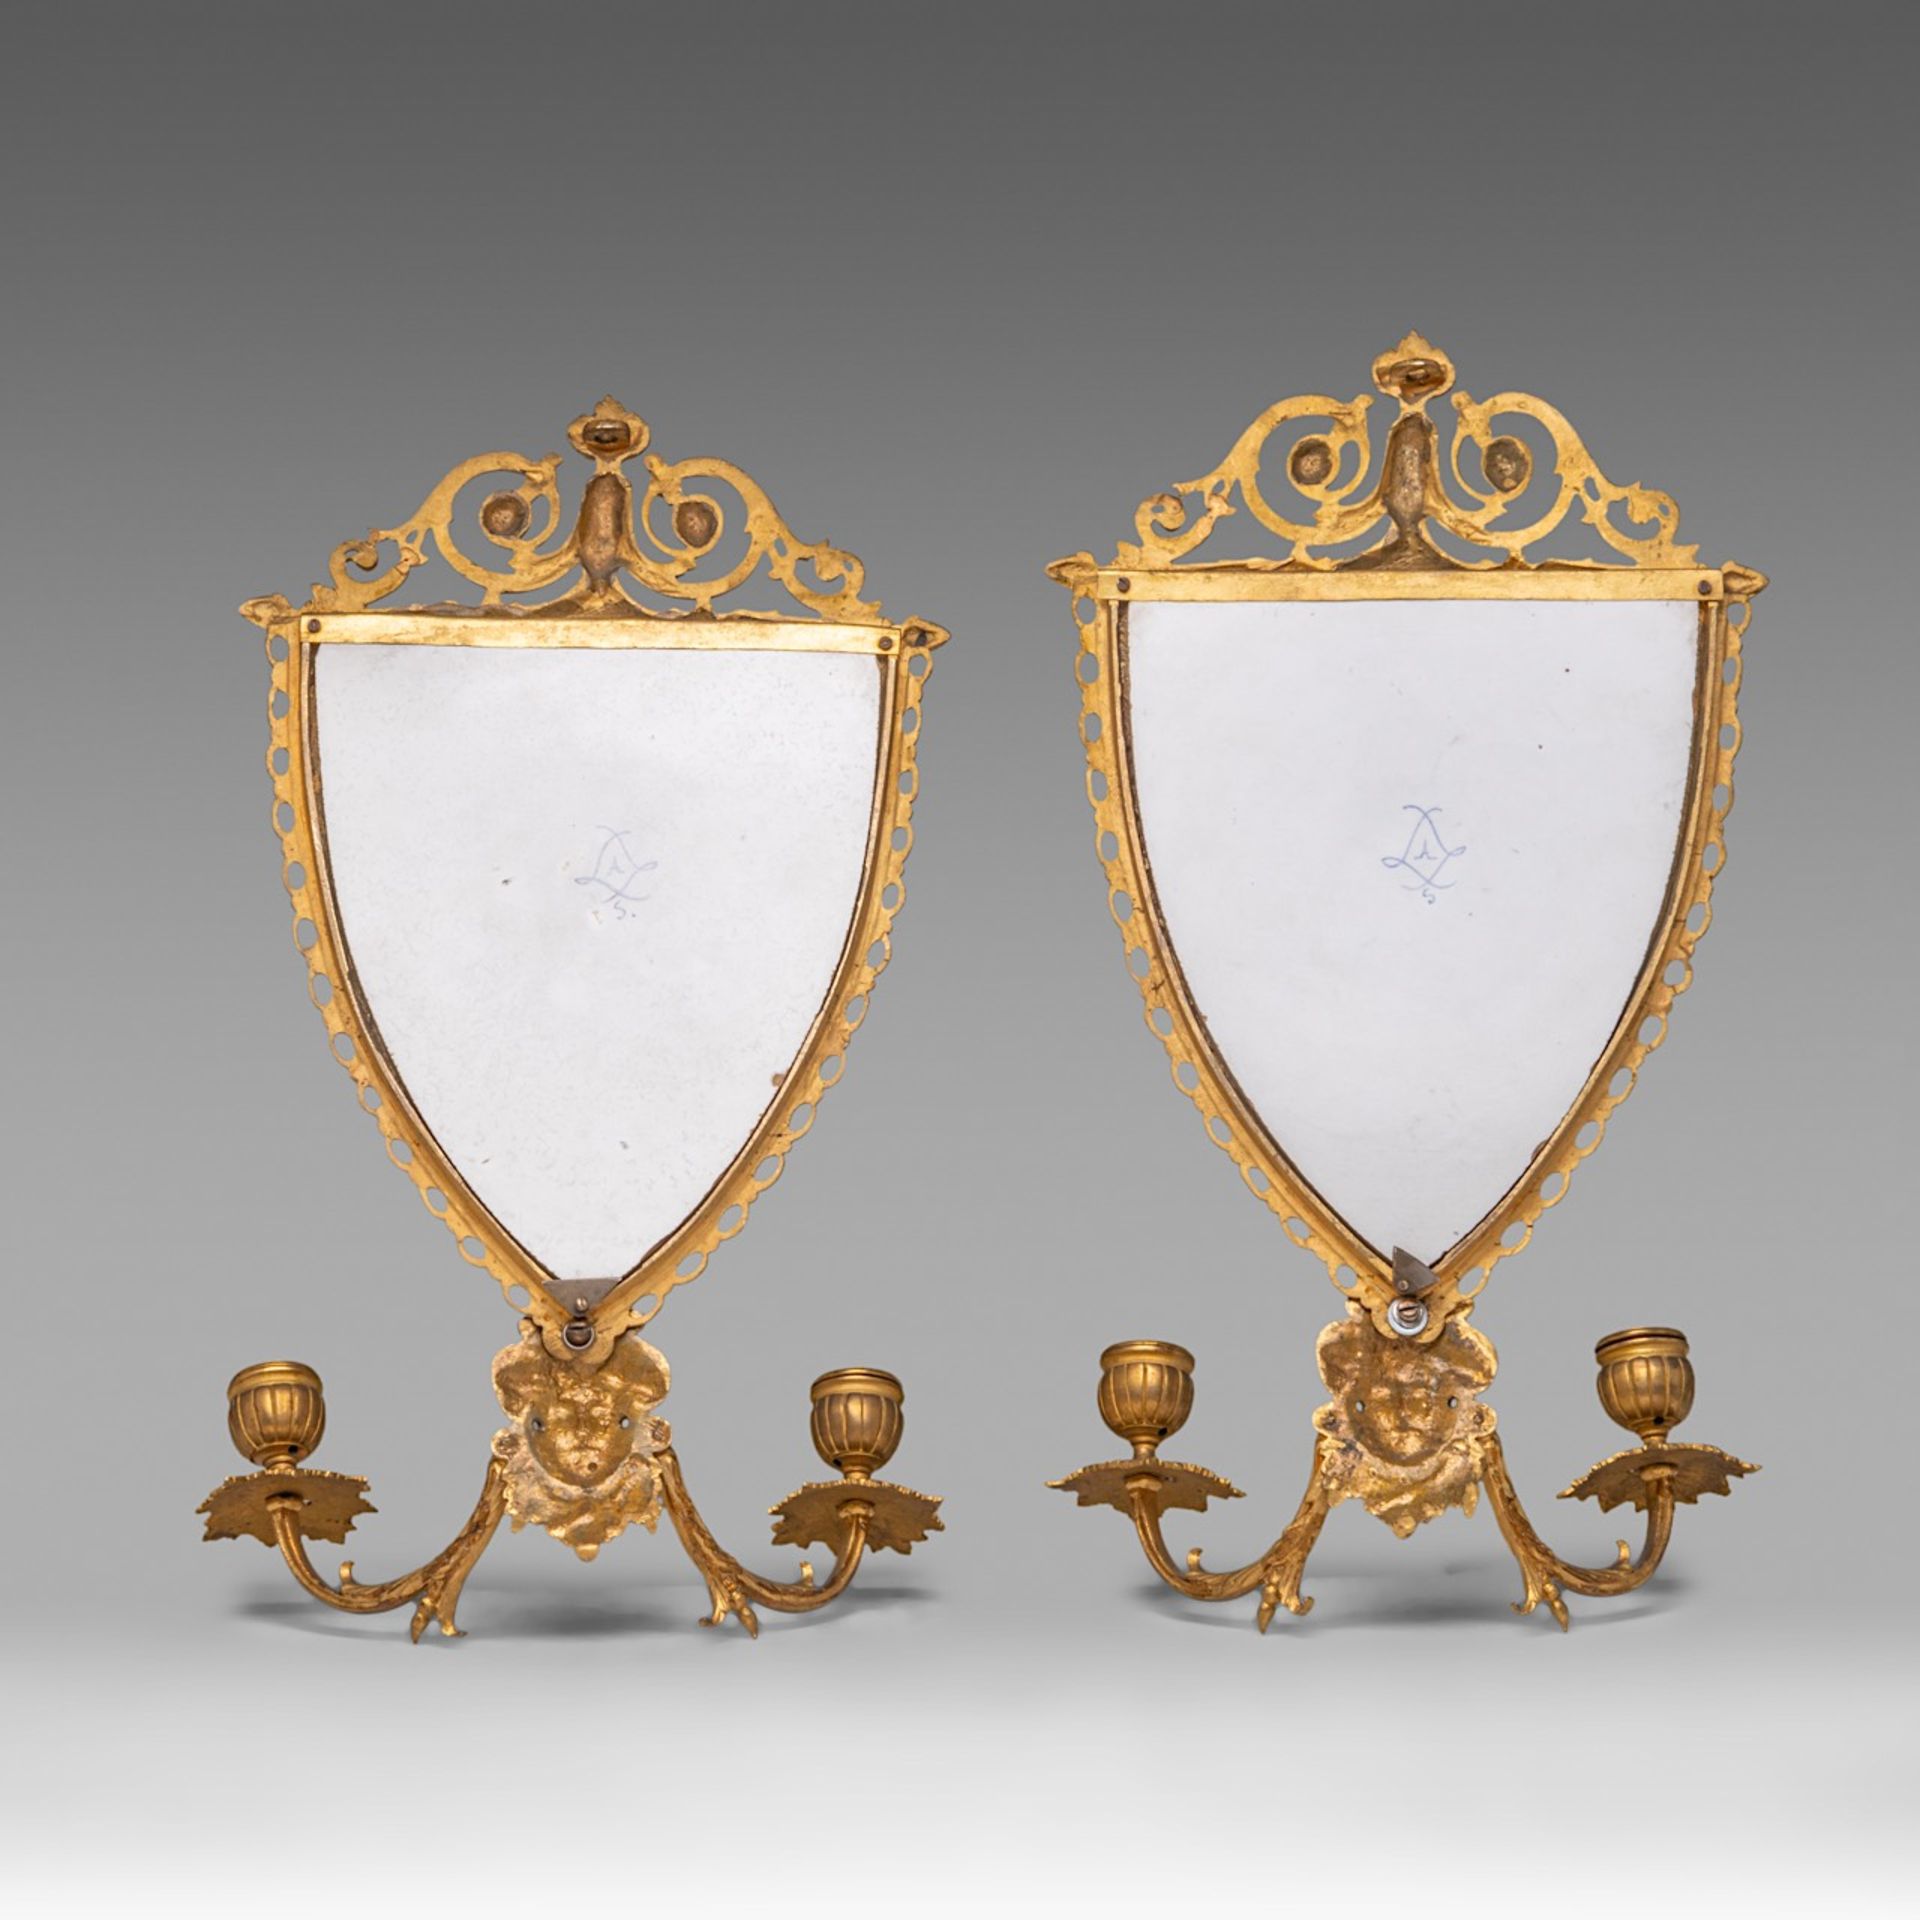 A pair of Louis XVI style Sevres porcelain and gilt bronze wall appliques, H 42 cm - Image 2 of 6